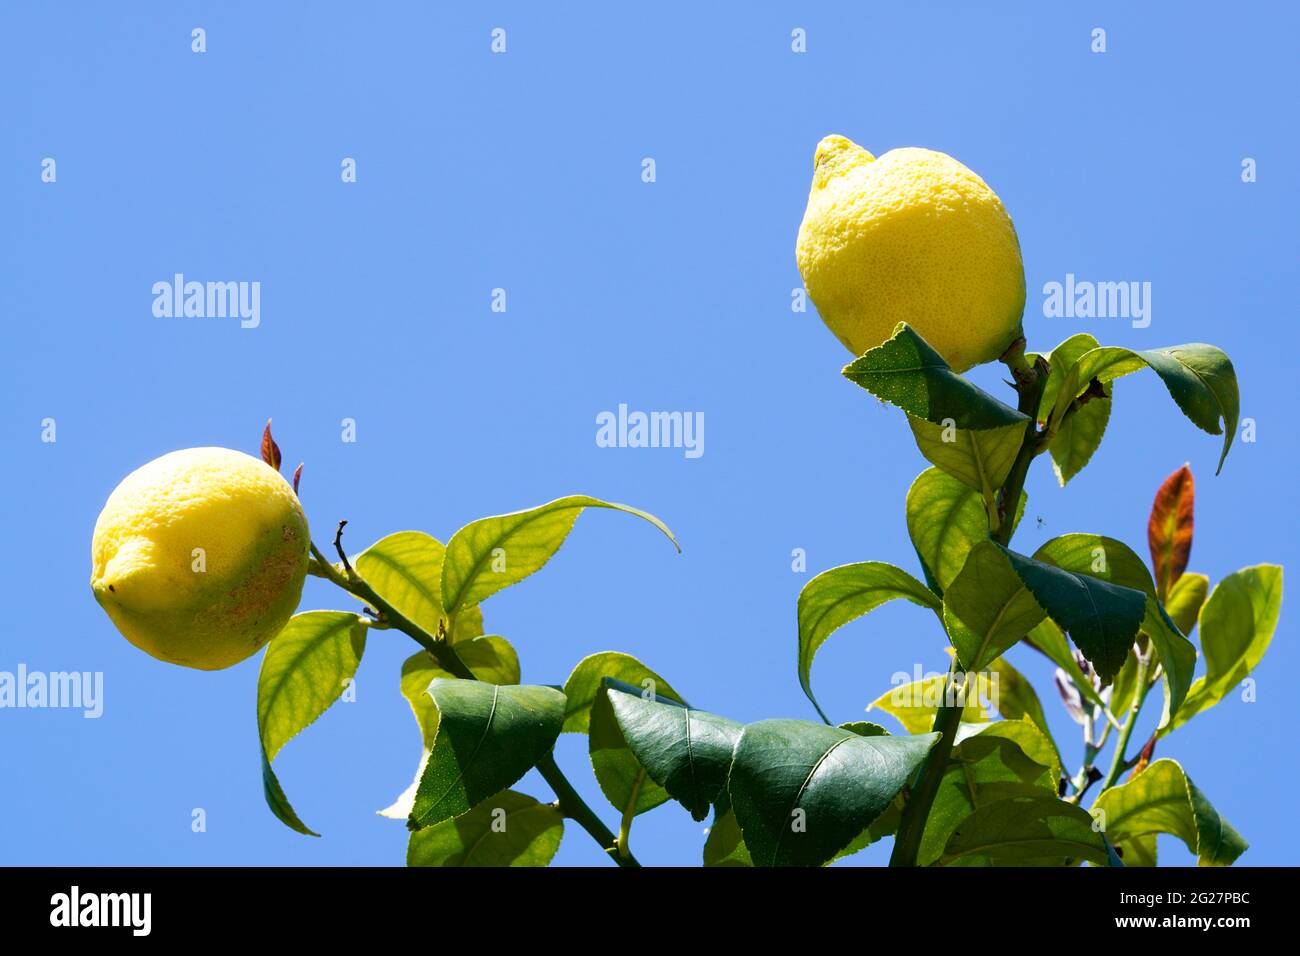 Branch of a zirtone tree with ripe fruits. Fruit tree with citrus and blue sky in the background. Stock Photo